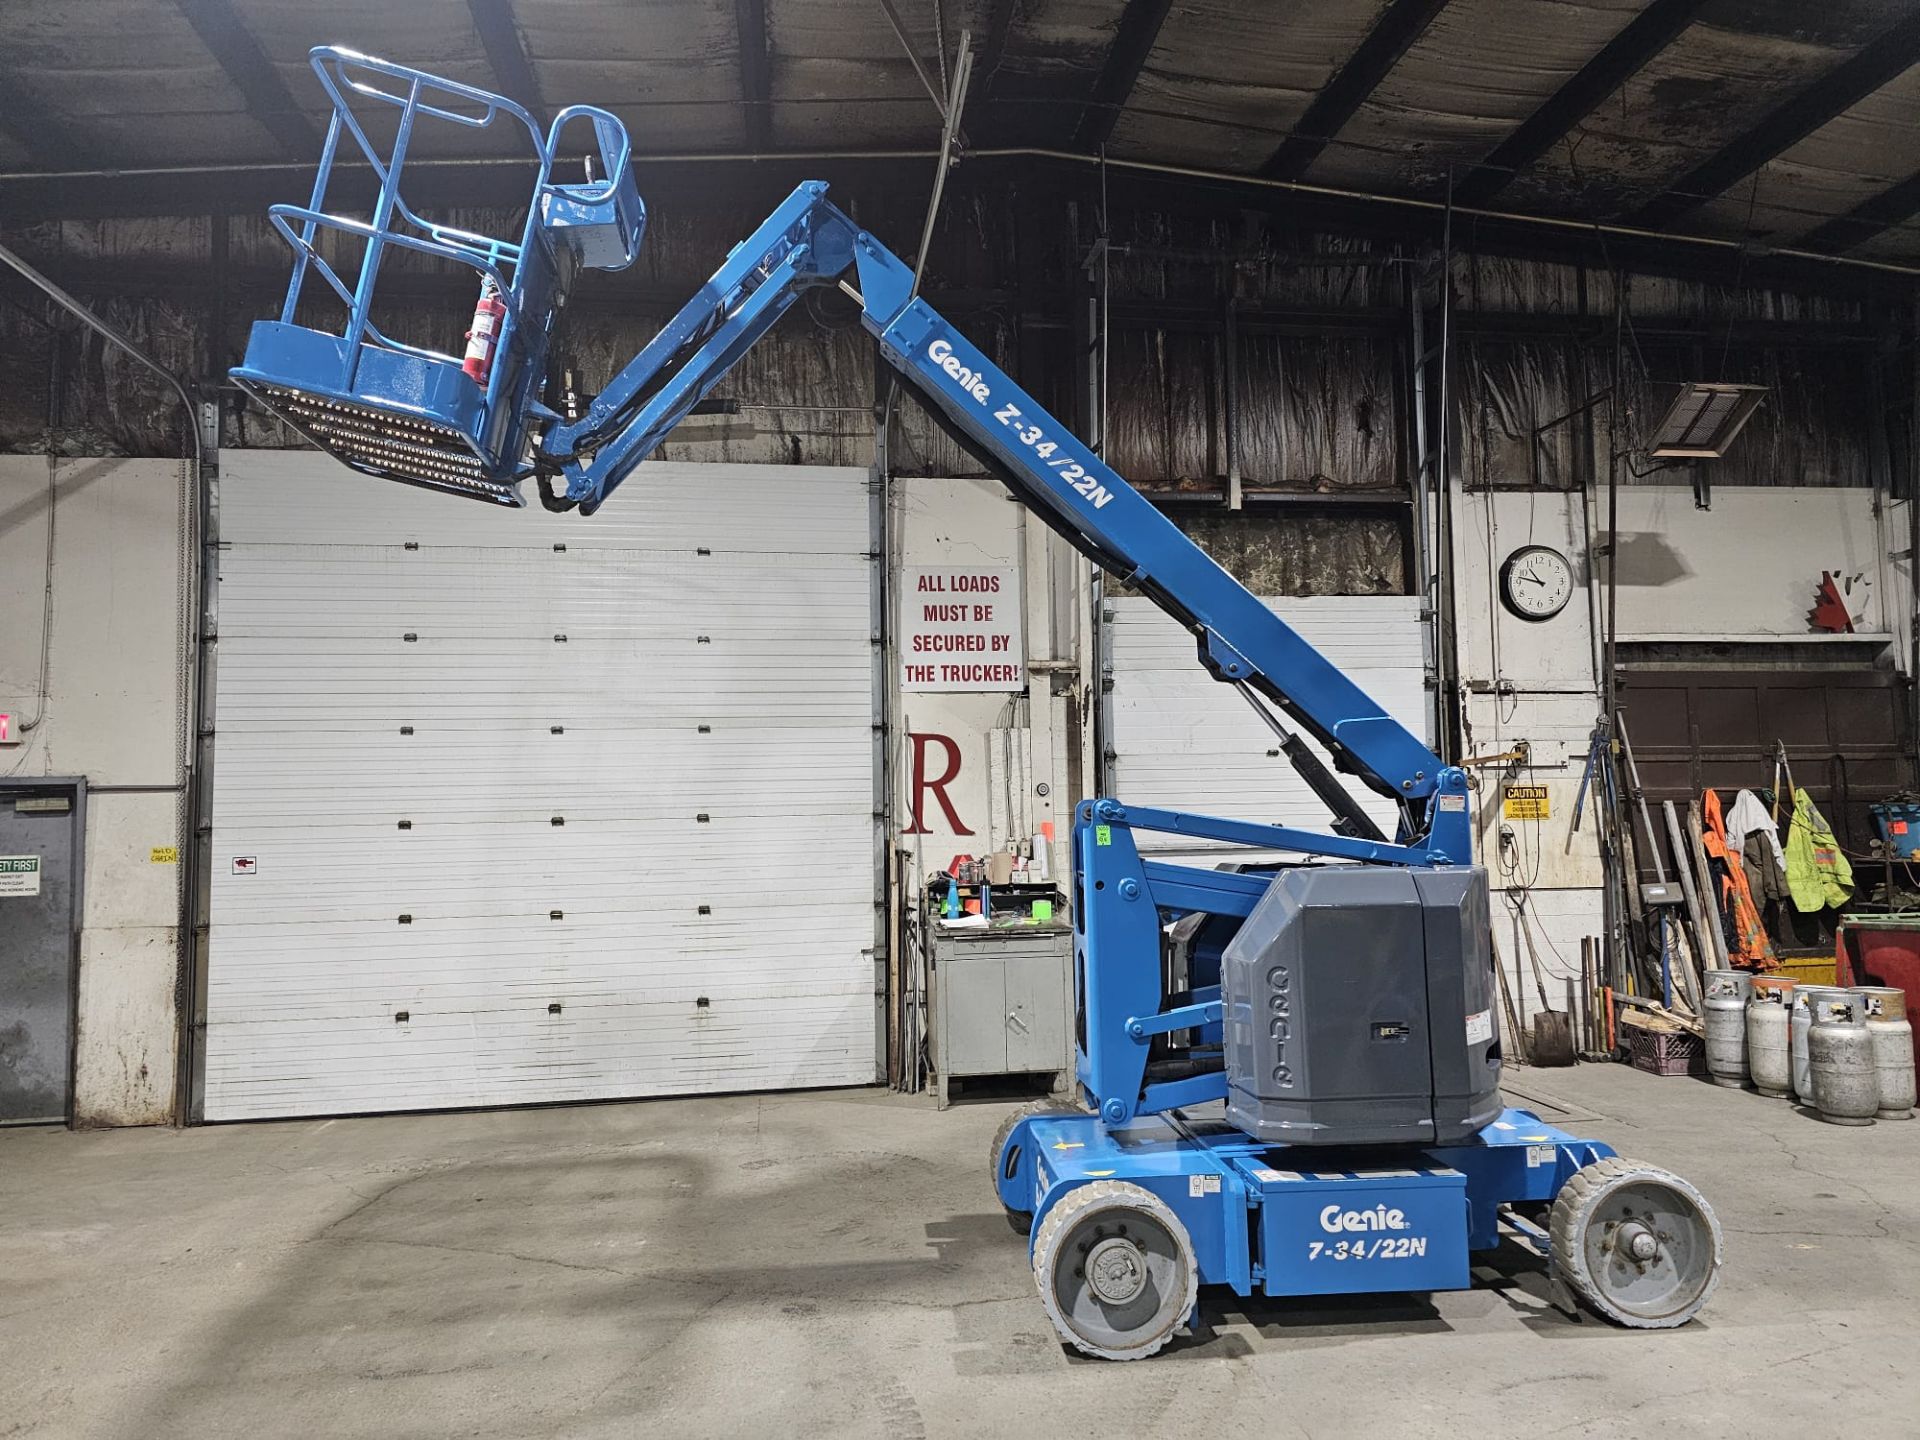 Genie Boom Lift model Z-34/22 with 34' high ELECTRIC Unit Made in the USA with LOW HOURS